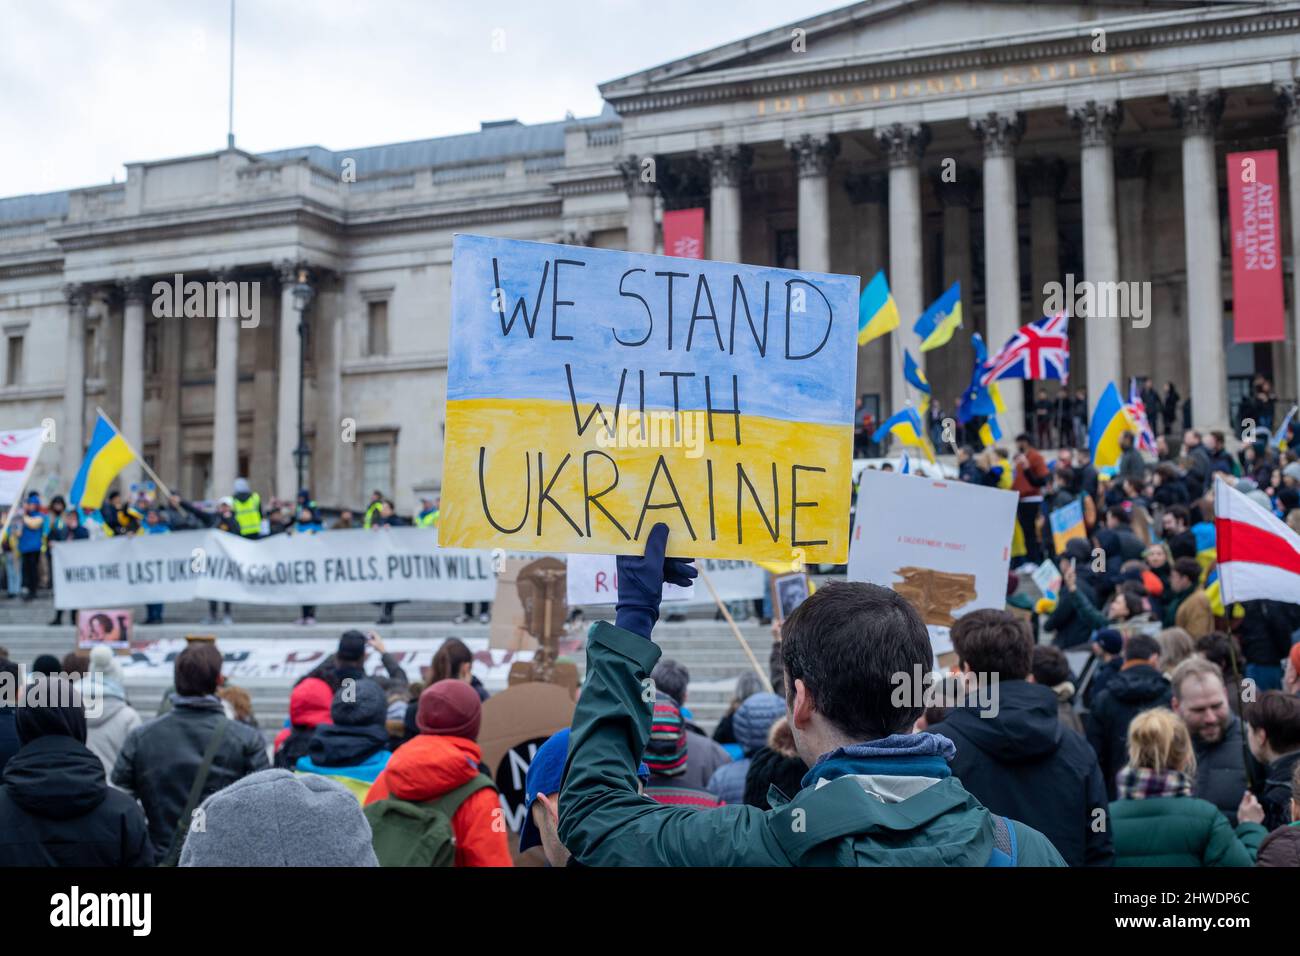 LONDON, MARCH 05 2022, A protester holds a sign saying  'We Stand With Ukraine' at protest against Russia's invasion of Ukraine on Trafalgar Square. Credit: Lucy North/Alamy Live News Stock Photo